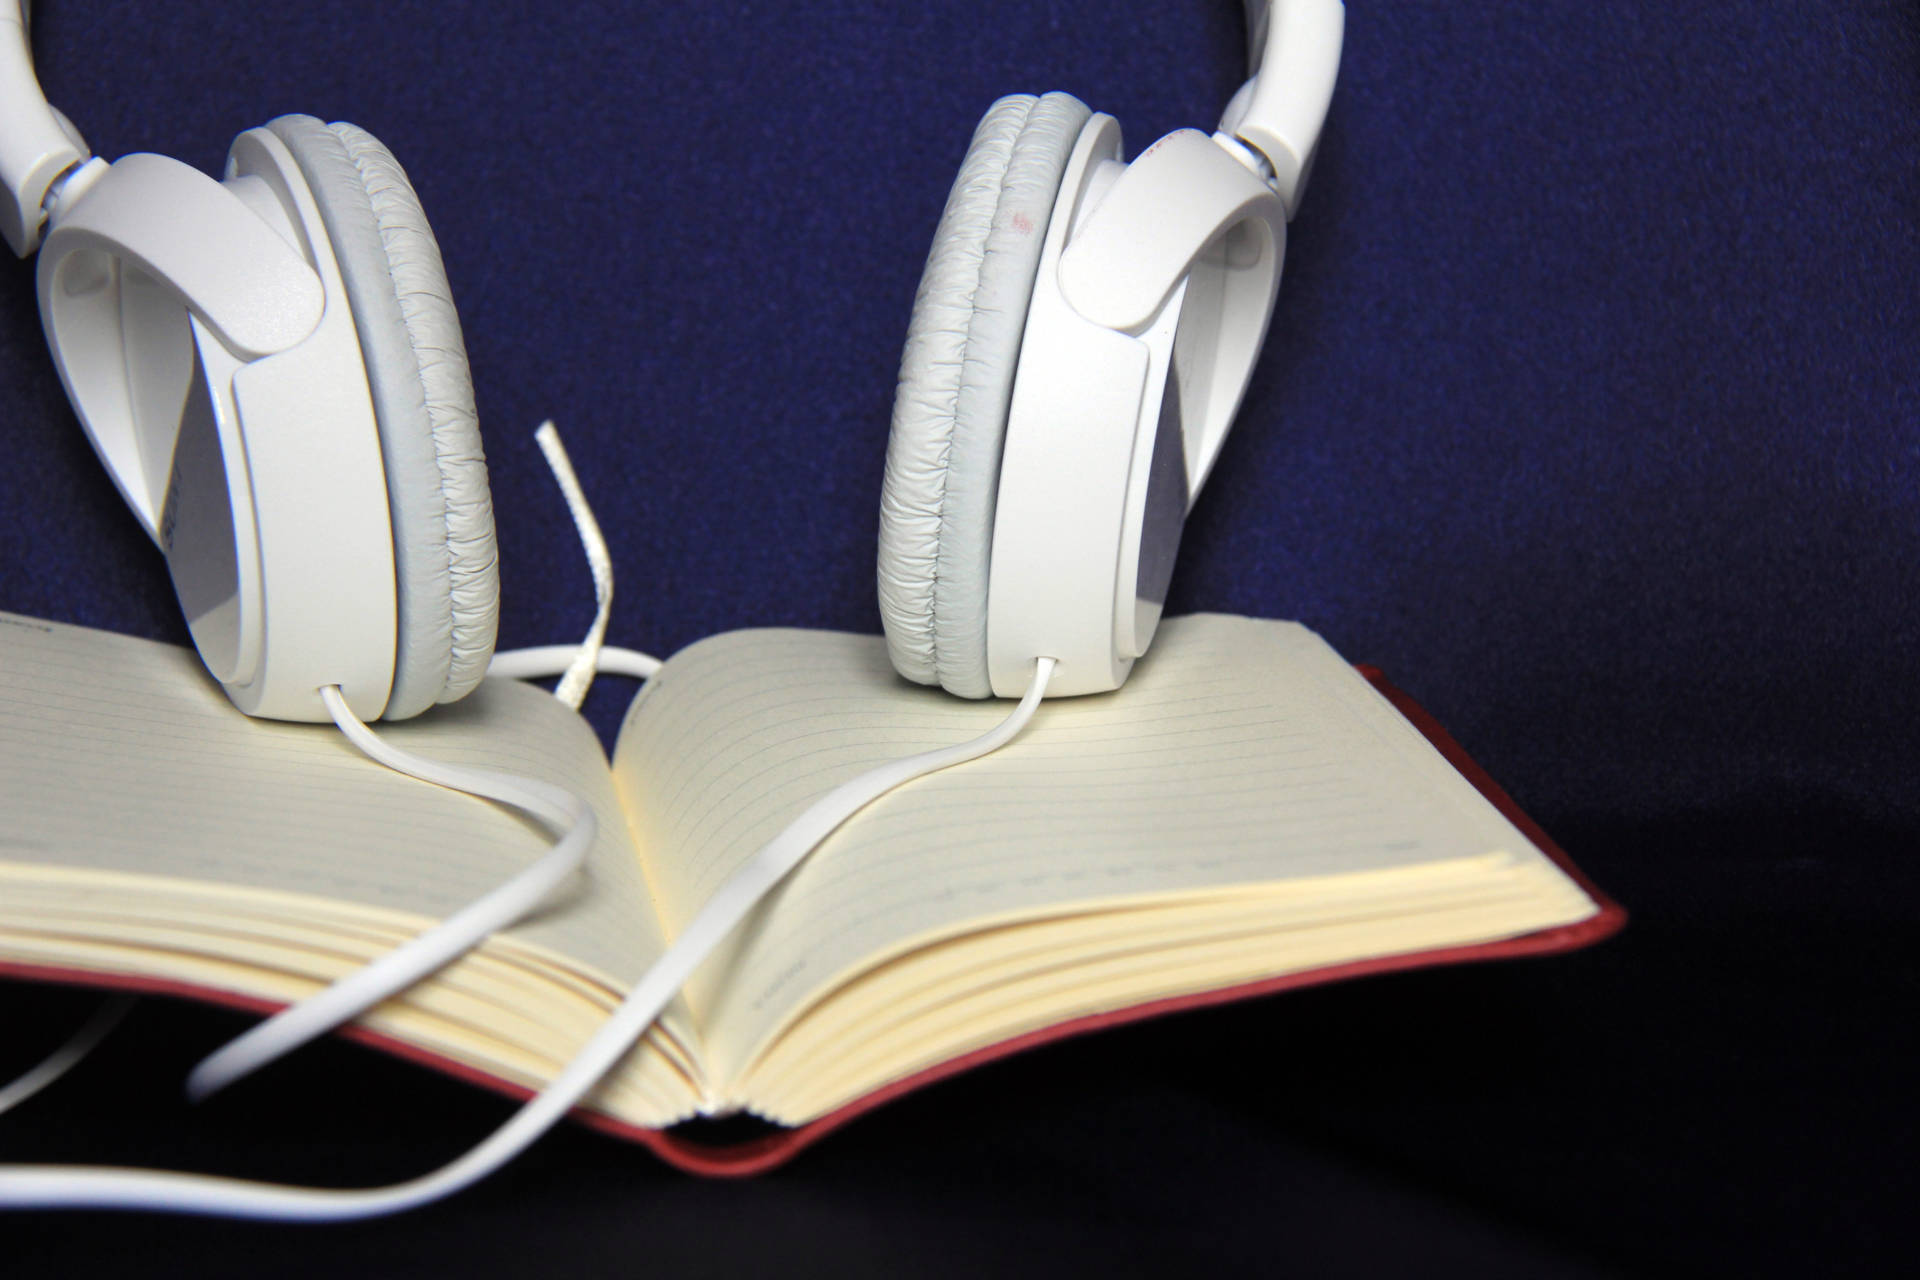 Listening Isn’t Cheating: How Audio Books Can Help Us Learn | MindShift | KQED News